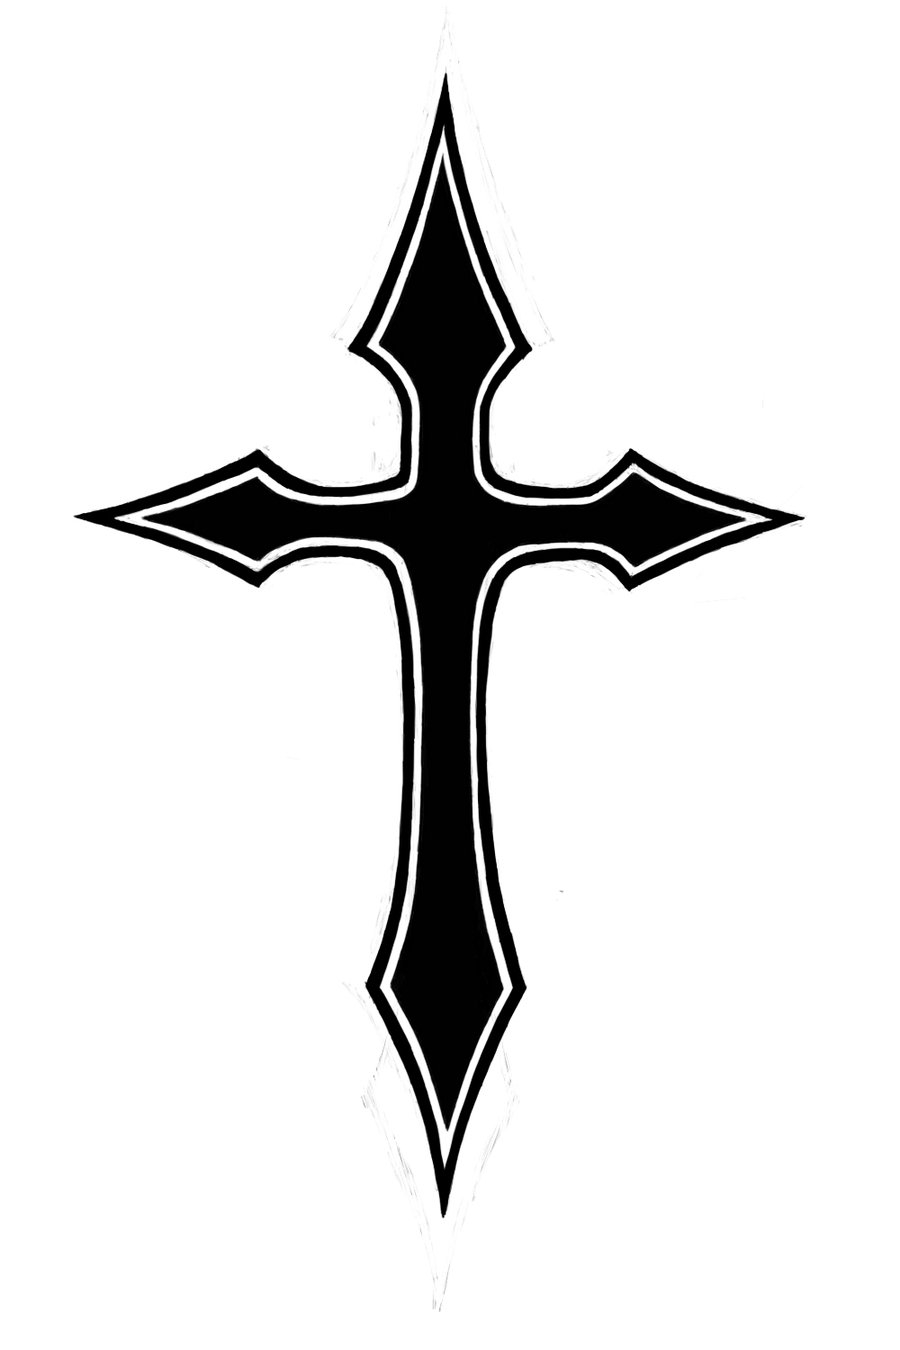 Free Black And White Cross Tattoo Download Free Clip Art Free Clip inside measurements 900 X 1350